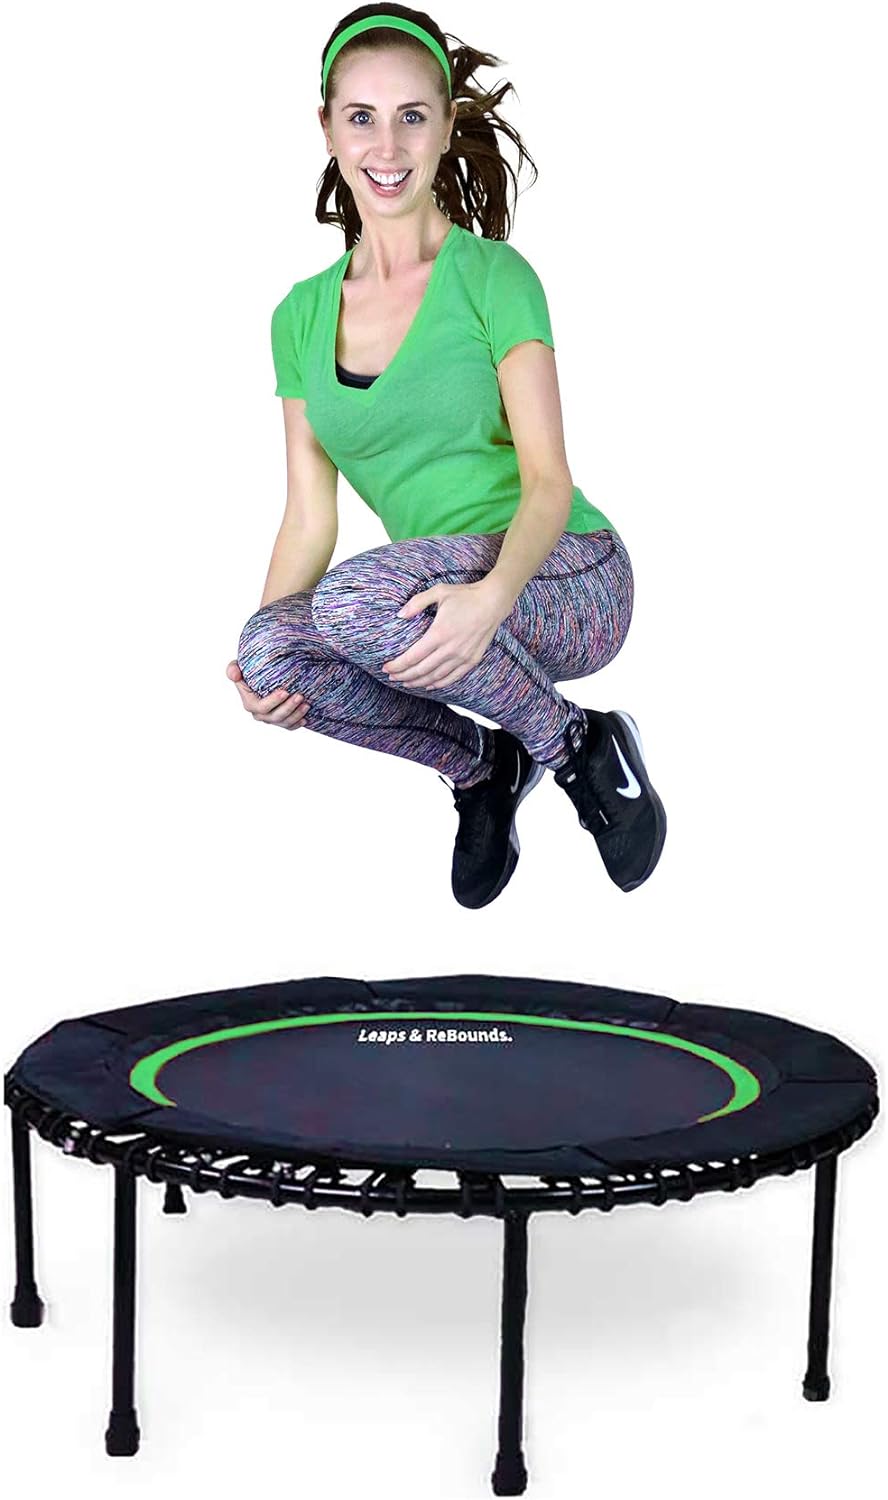 Improve Cardio Minimal Joint Impact High-Calorie Burn Full-Size Protective Mat Balance LEAPS & REBOUNDS: Rebounder Fitness Trampoline and Physical Strength